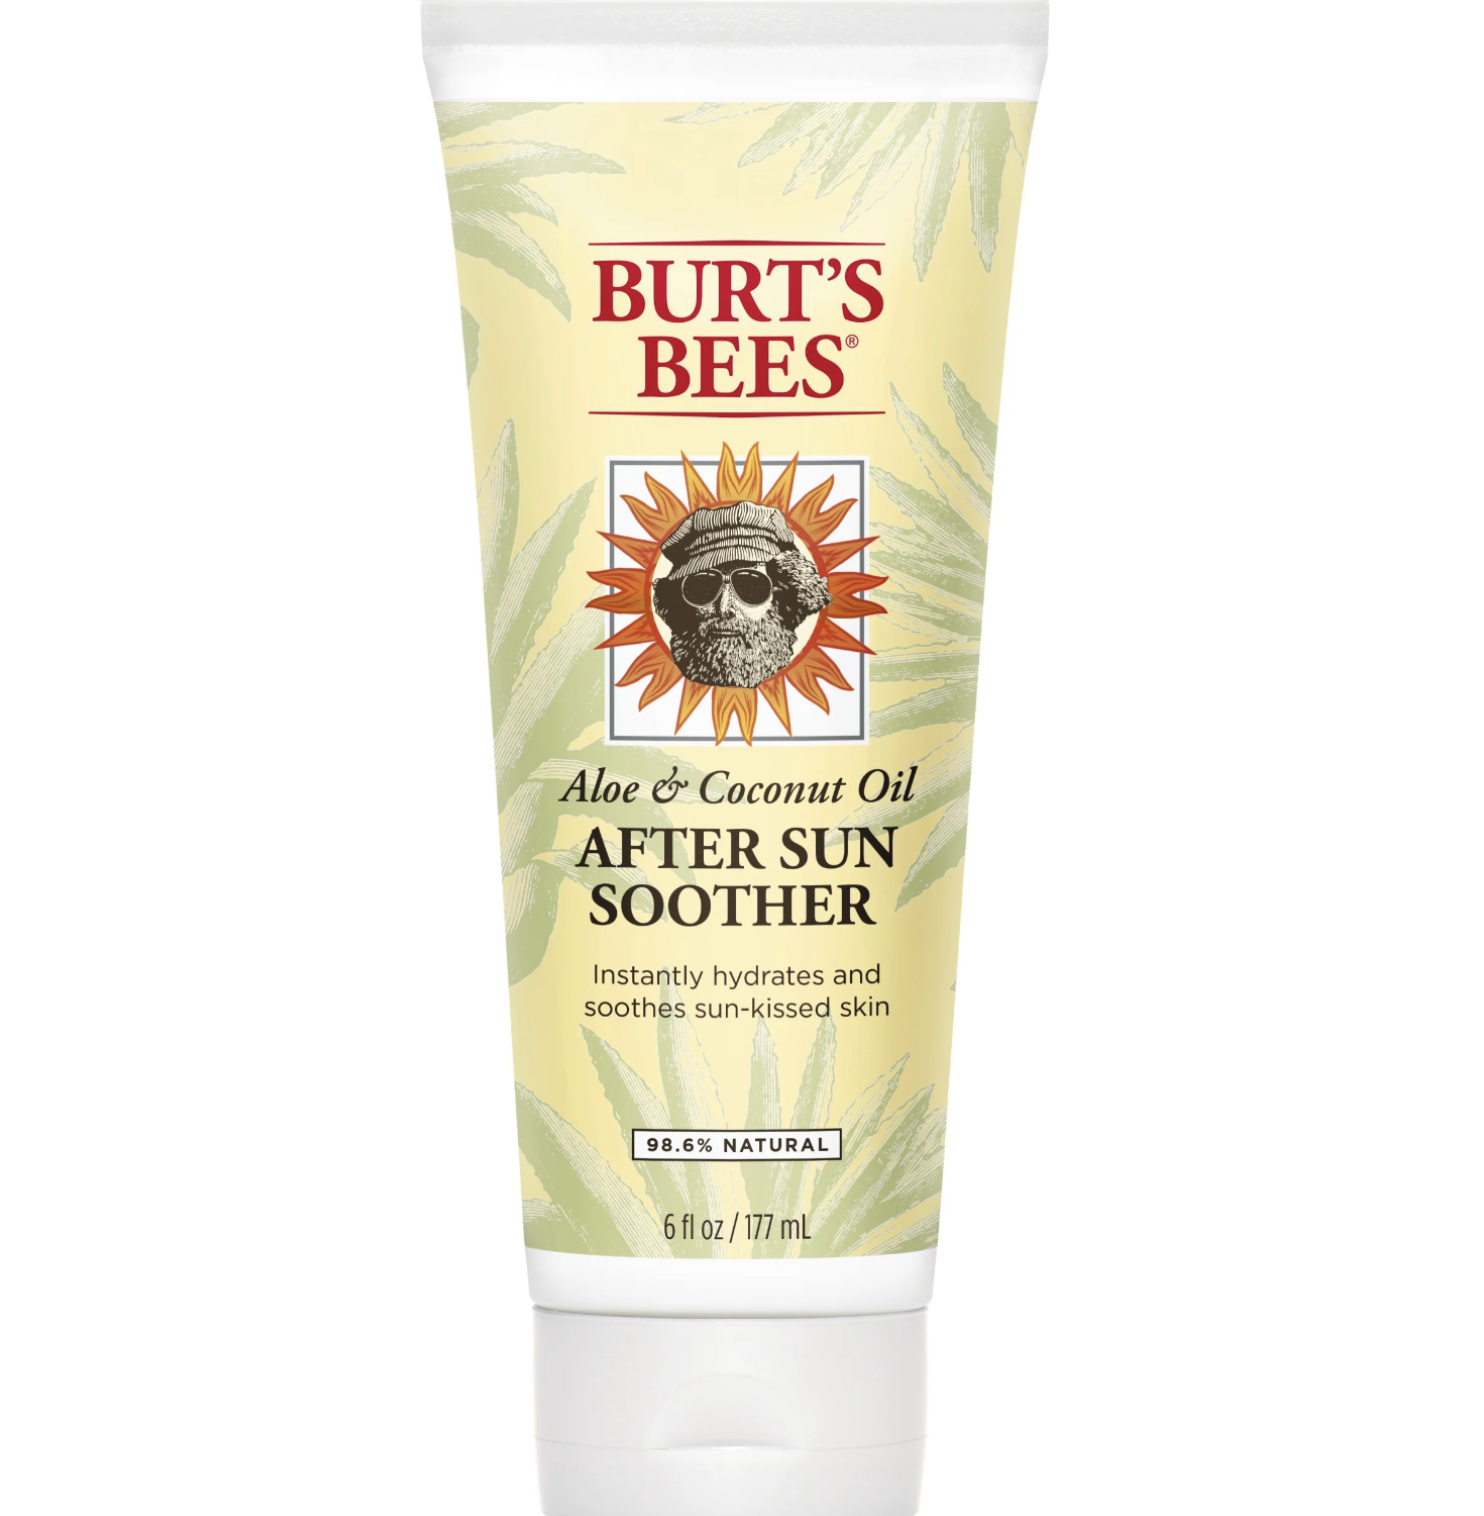 the bottle of after sun soother